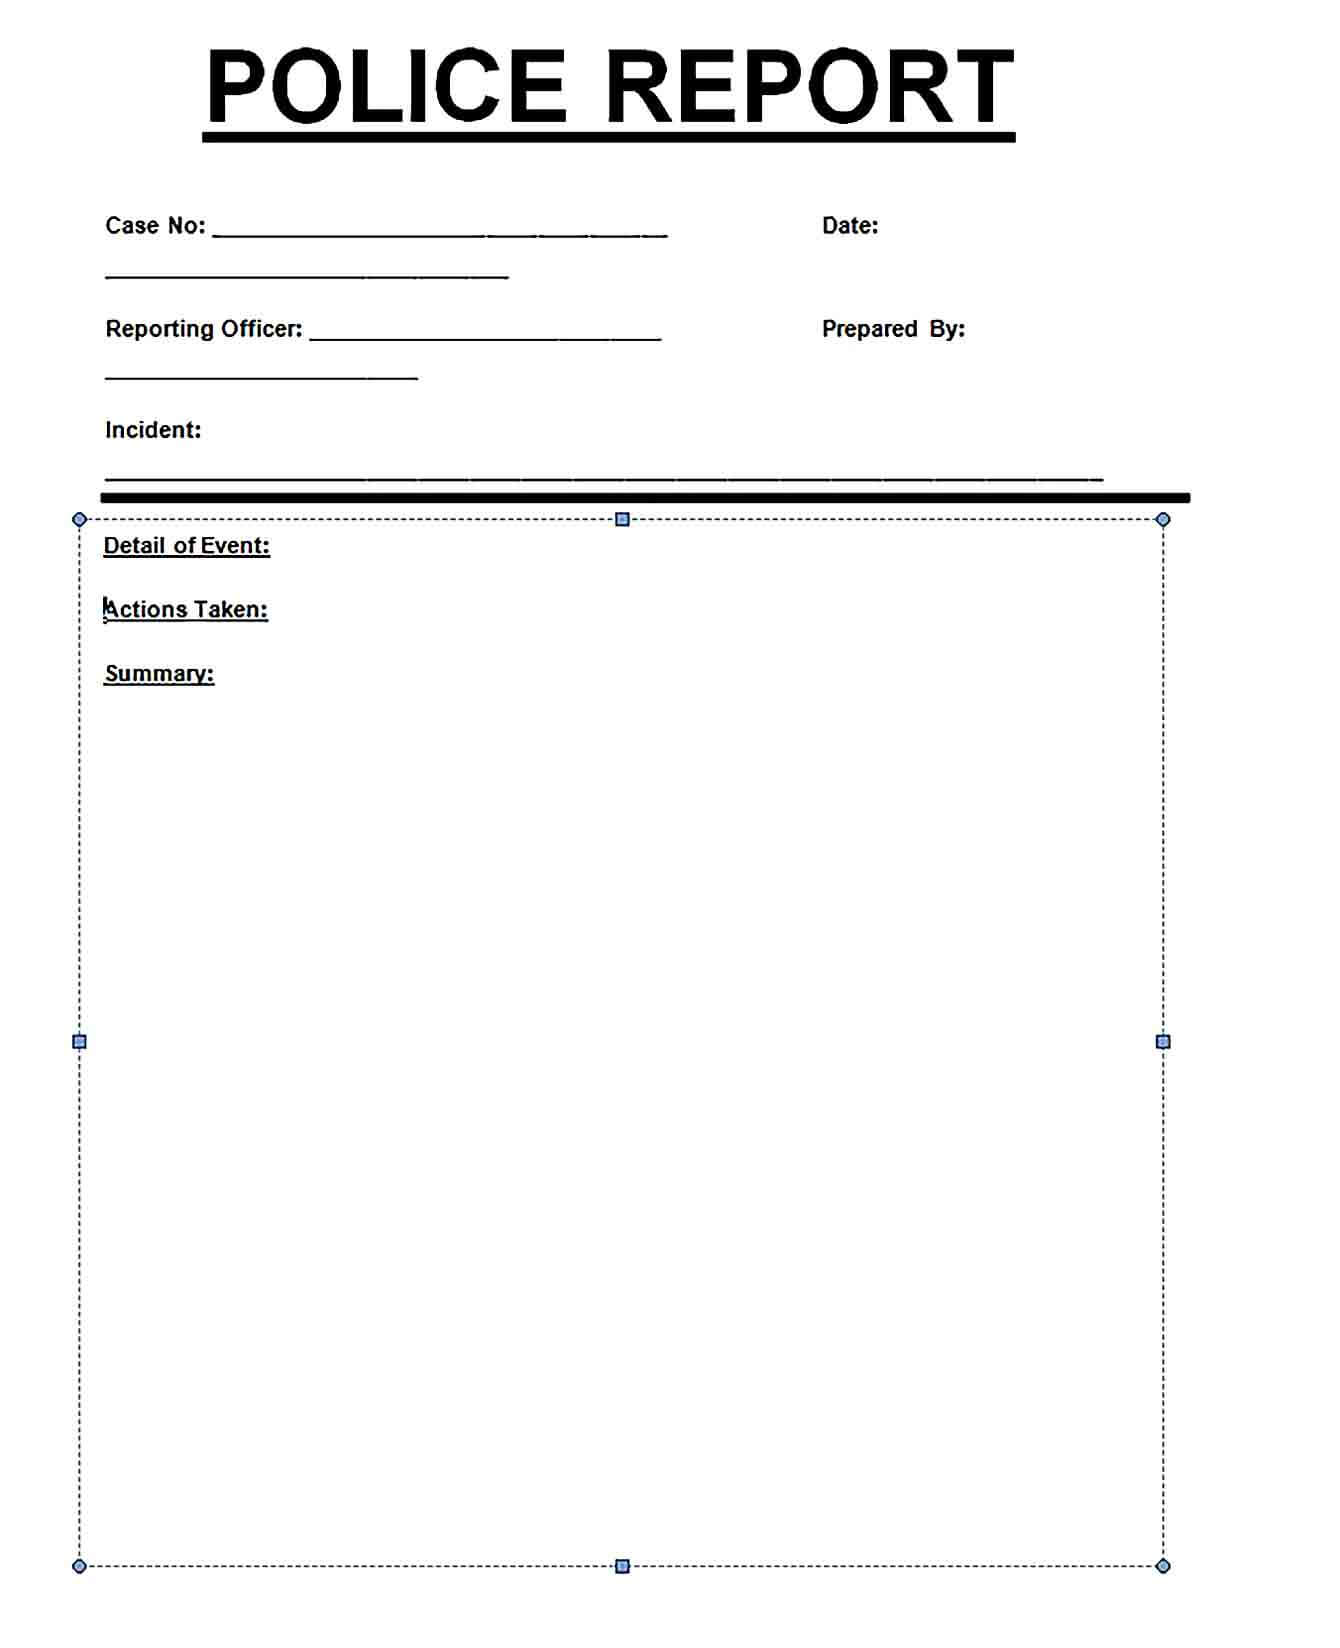 Sample police report template